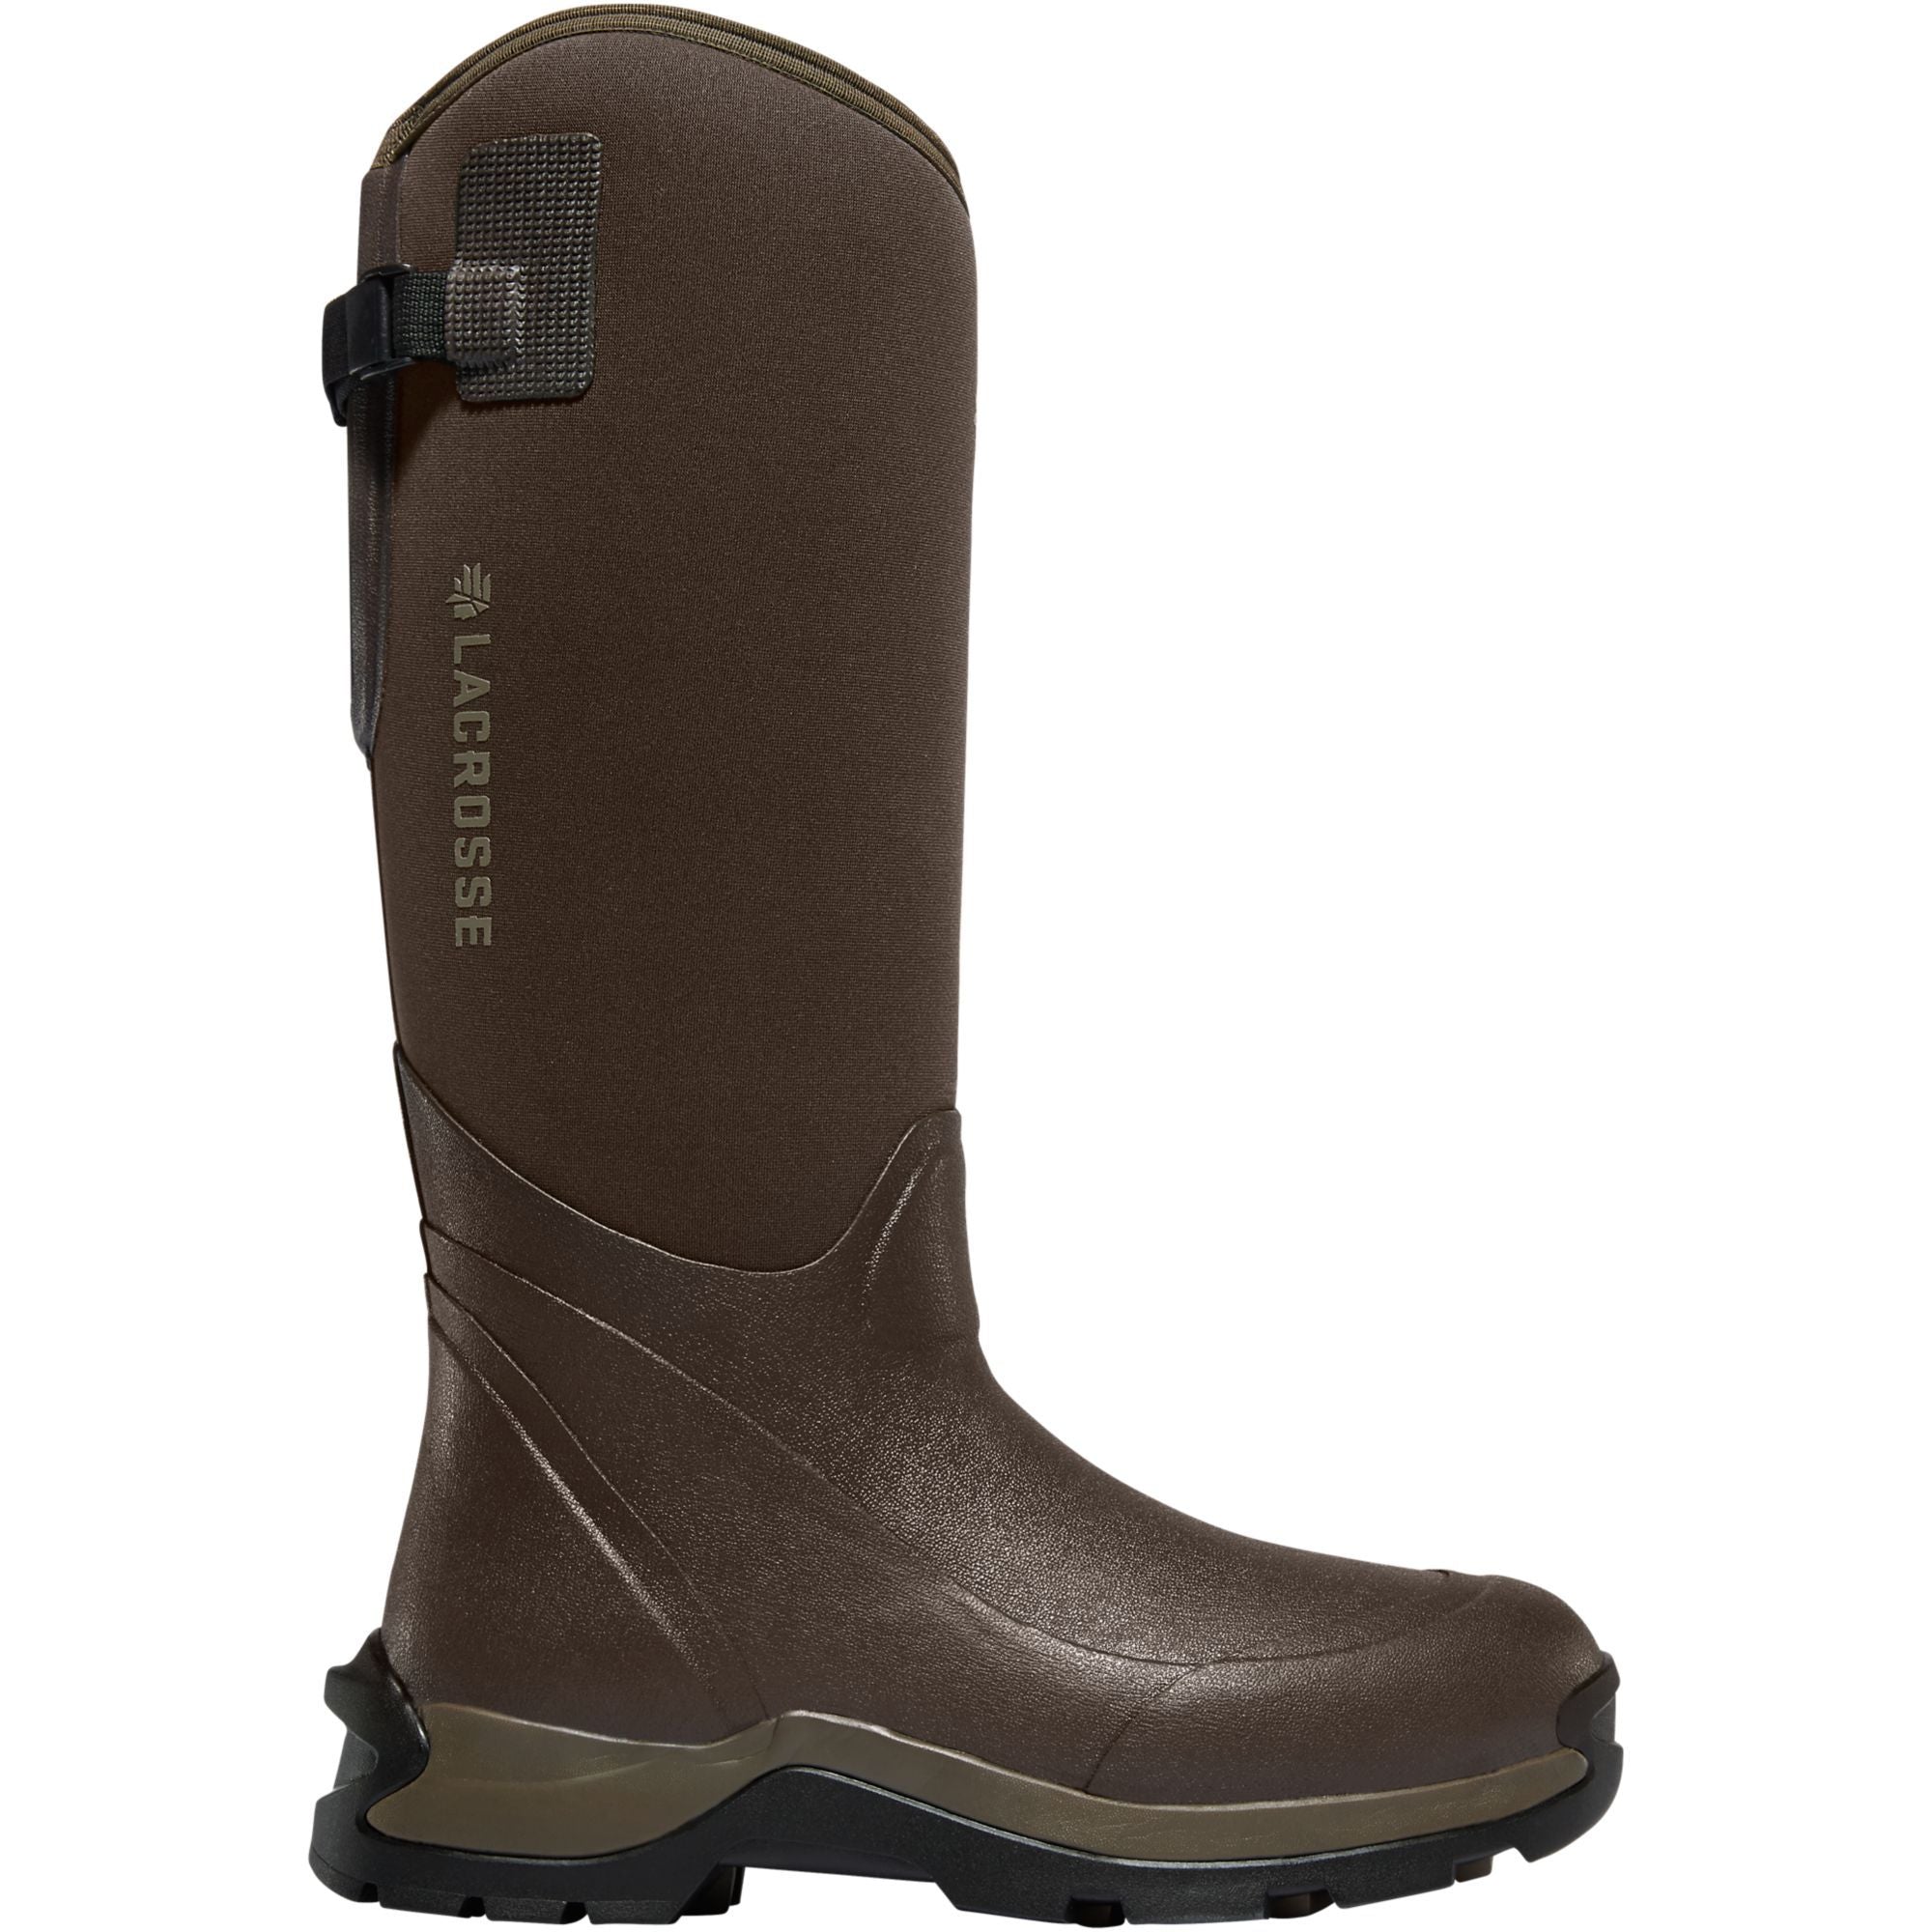 LaCrosse Men's Alpha Thermal 16" Ins Rubber Work Boot - Brown - 644109 7 / Brown - Overlook Boots